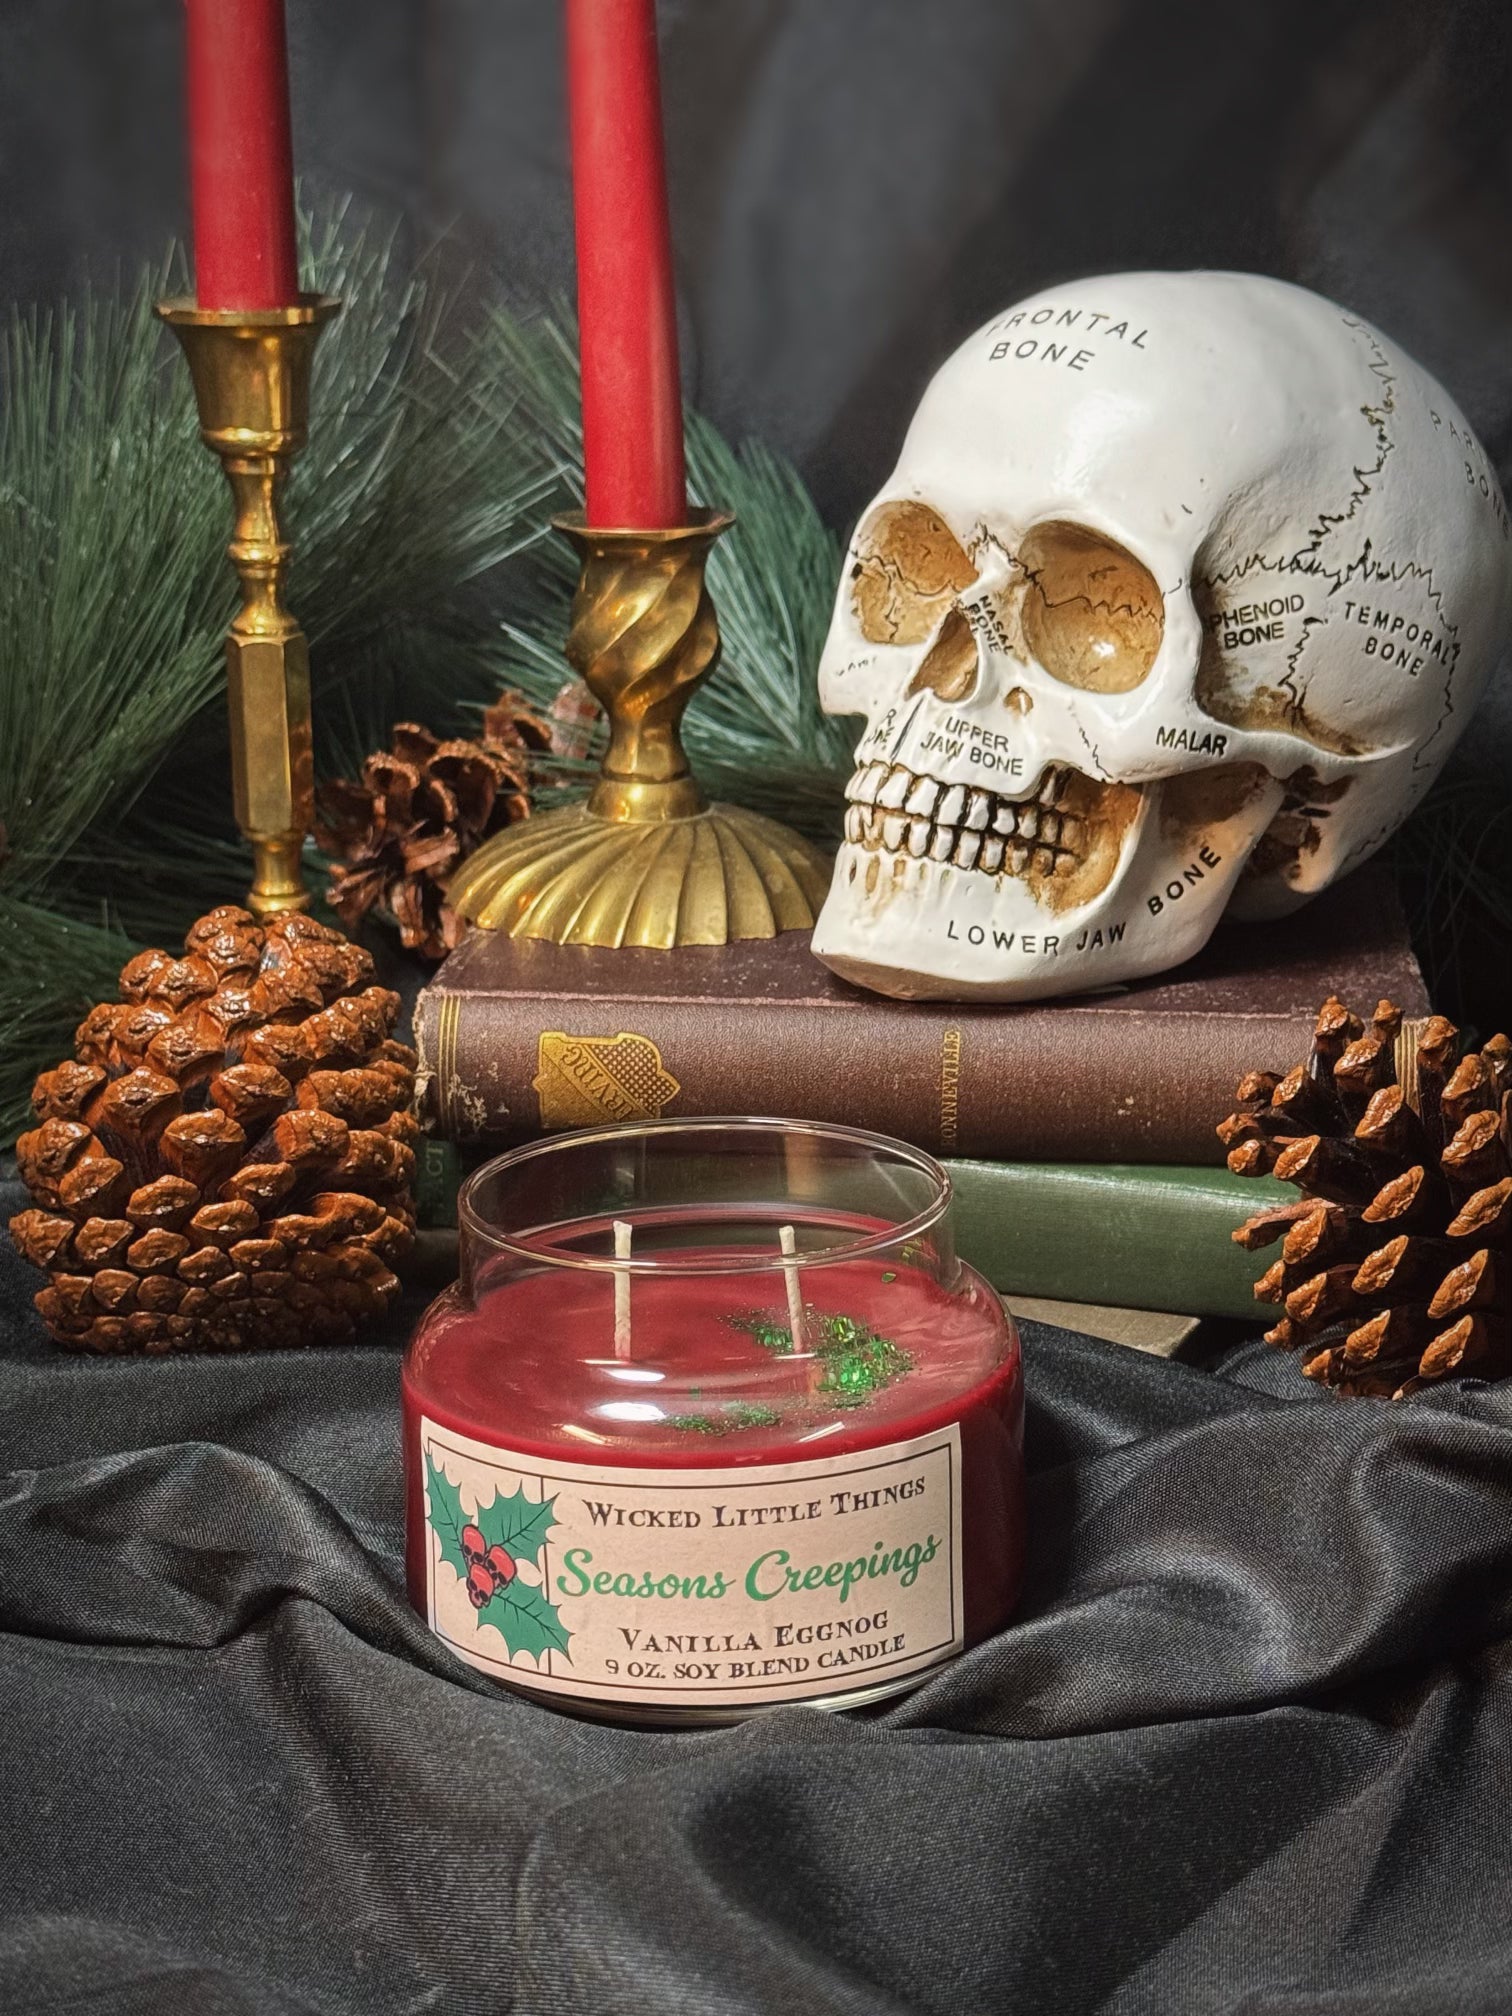 15 oz Gingerdead Man - Gingerbread Double Cotton Wick Candle